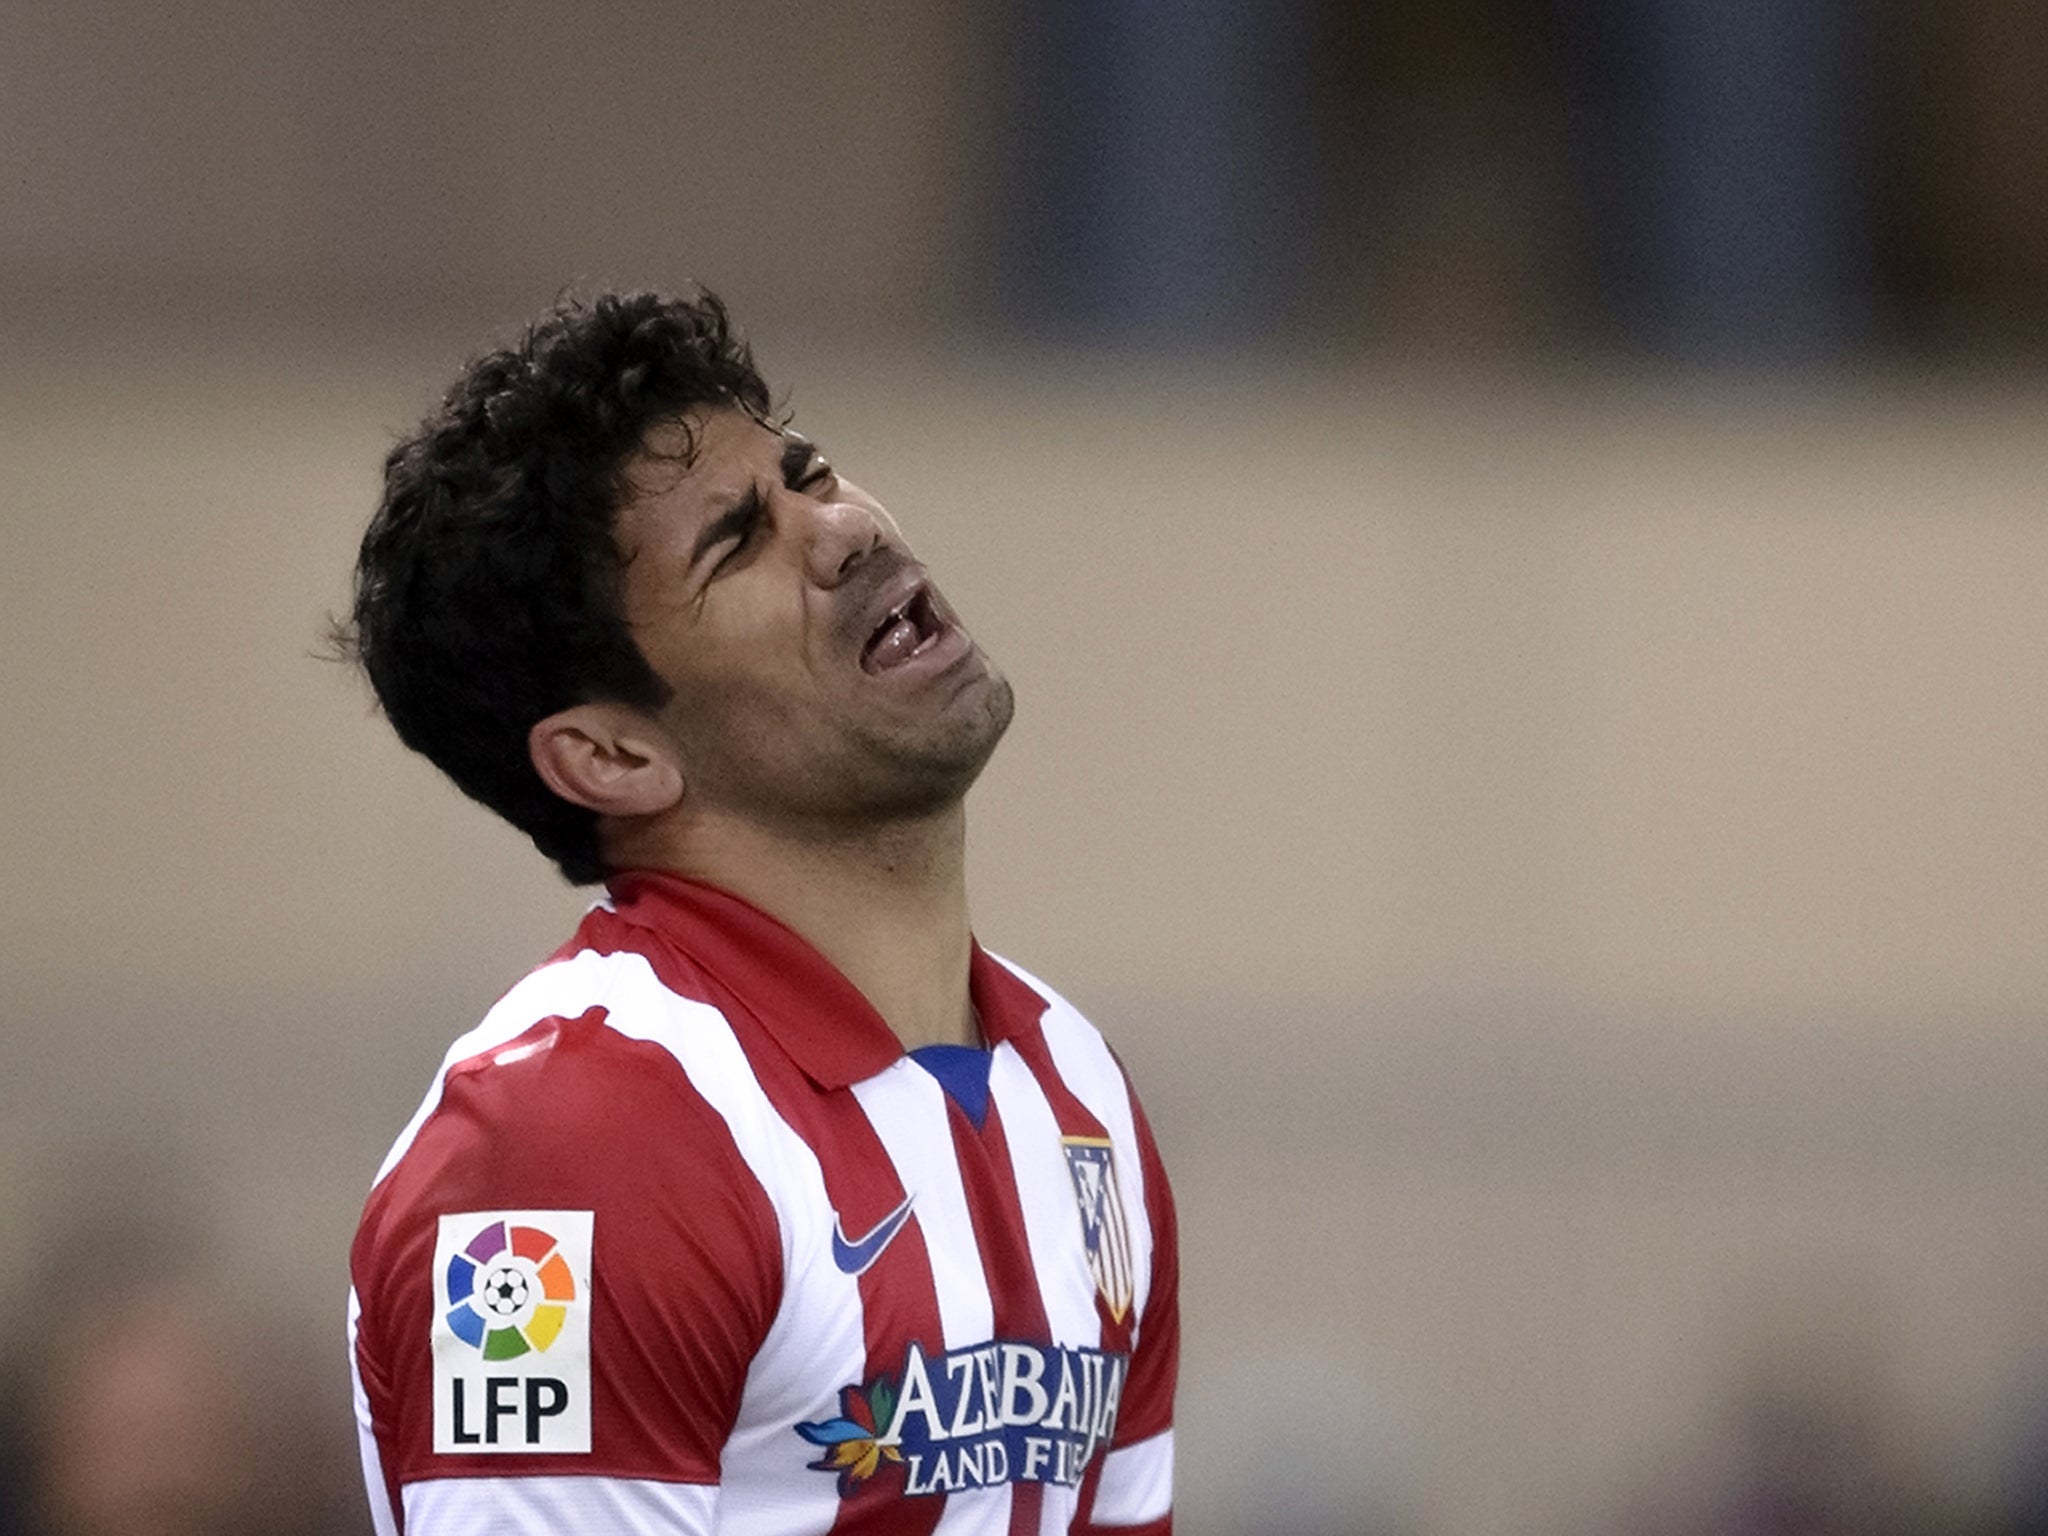 Atletico Madrid striker Diego Costa will not be joining Arsenal or Chelsea according to director of football Jose Luis Caminero